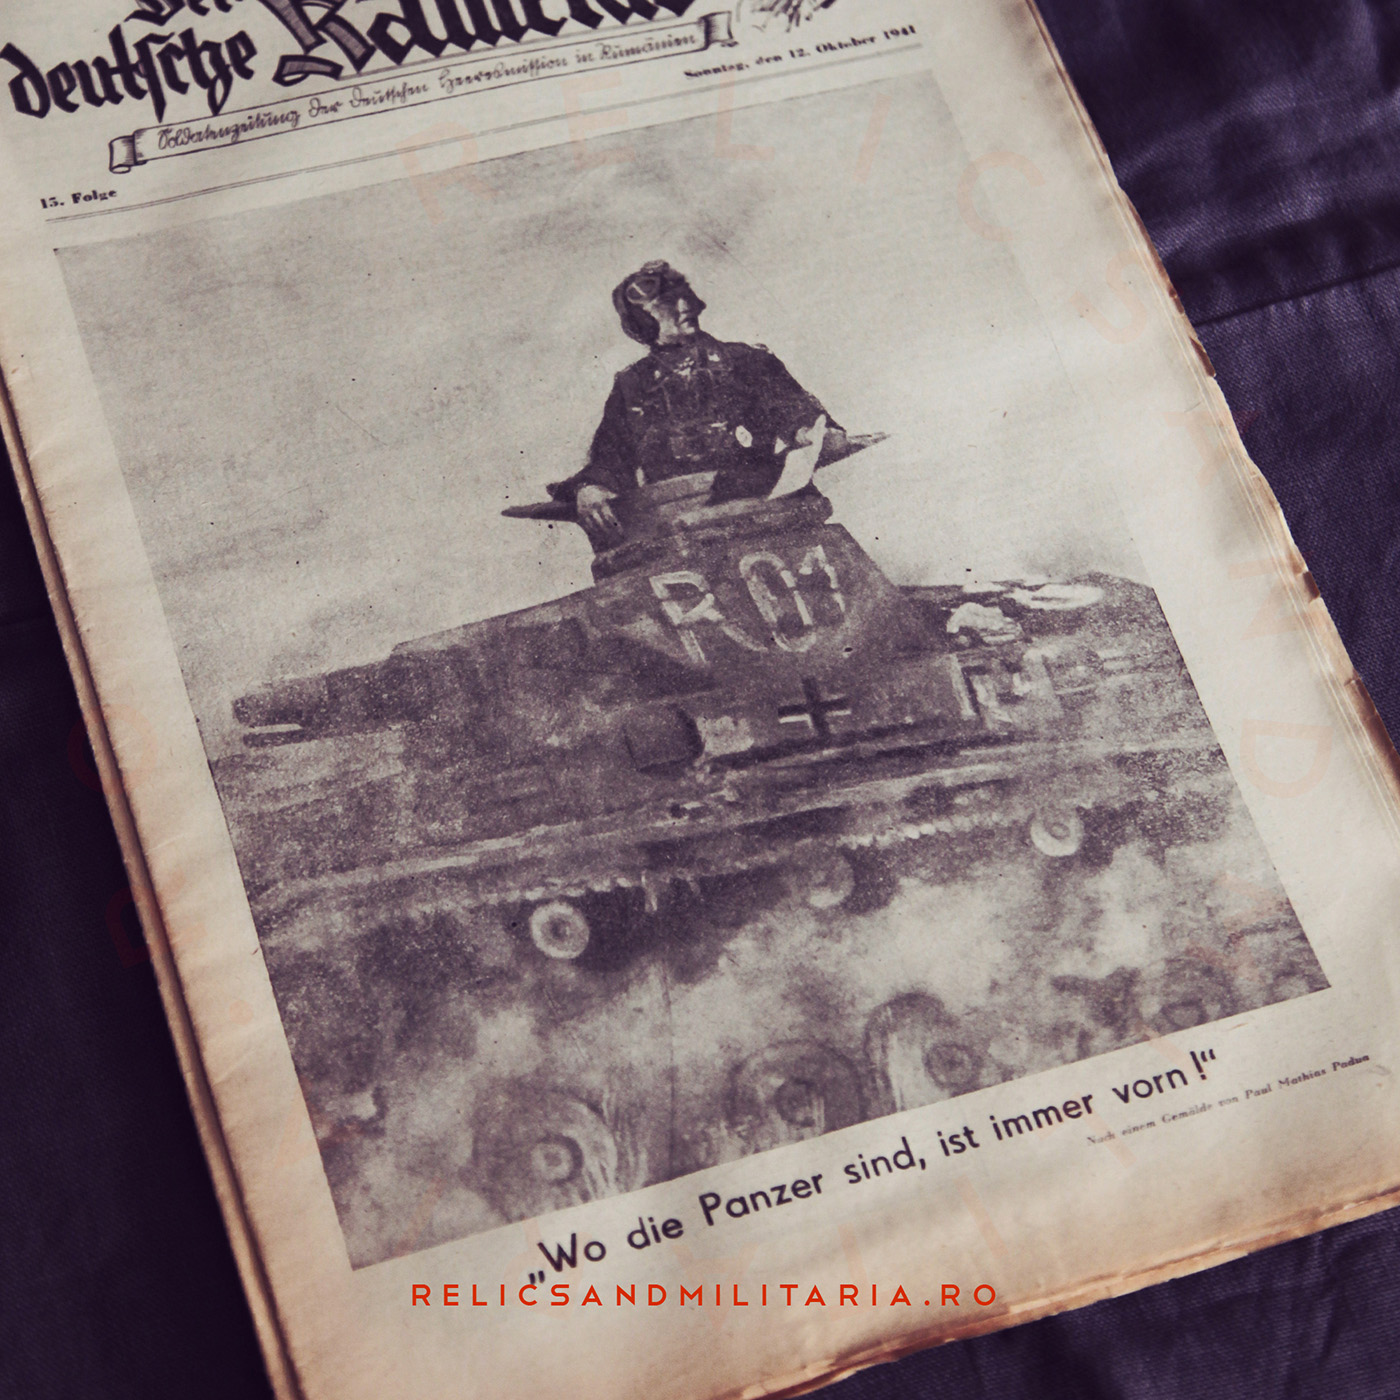 The German comrade. Soldier's newspaper of the German Army mission in Romania